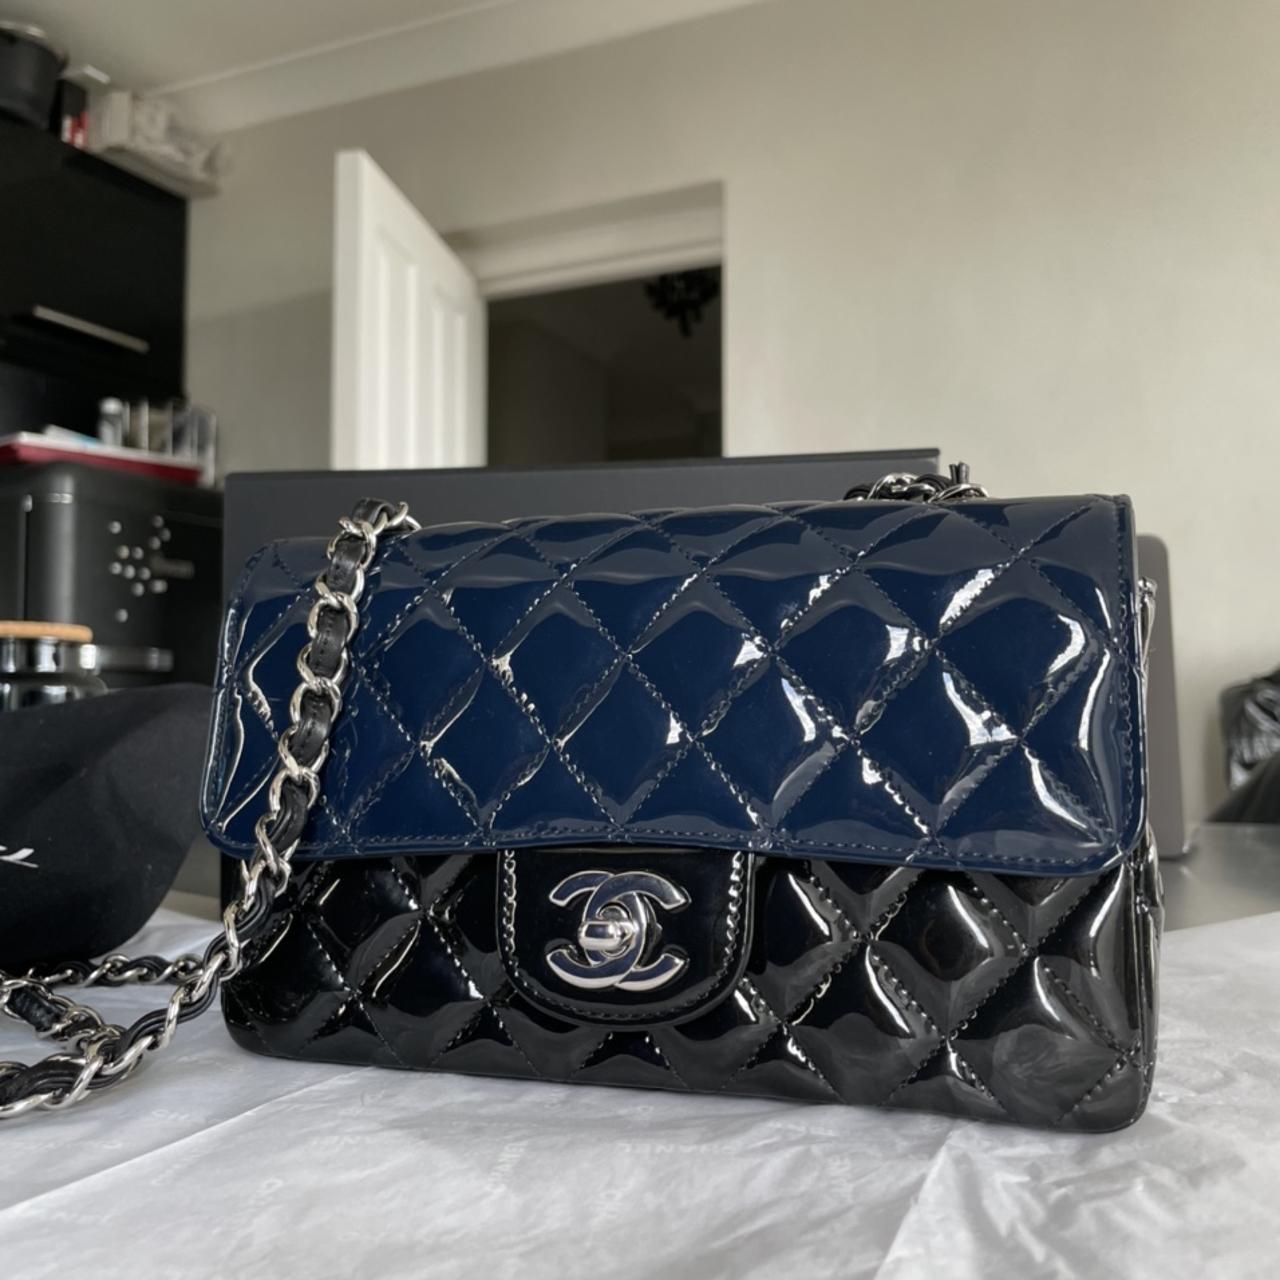 Rare Chanel Flap Bag in mini, two tone (navy &... - Depop